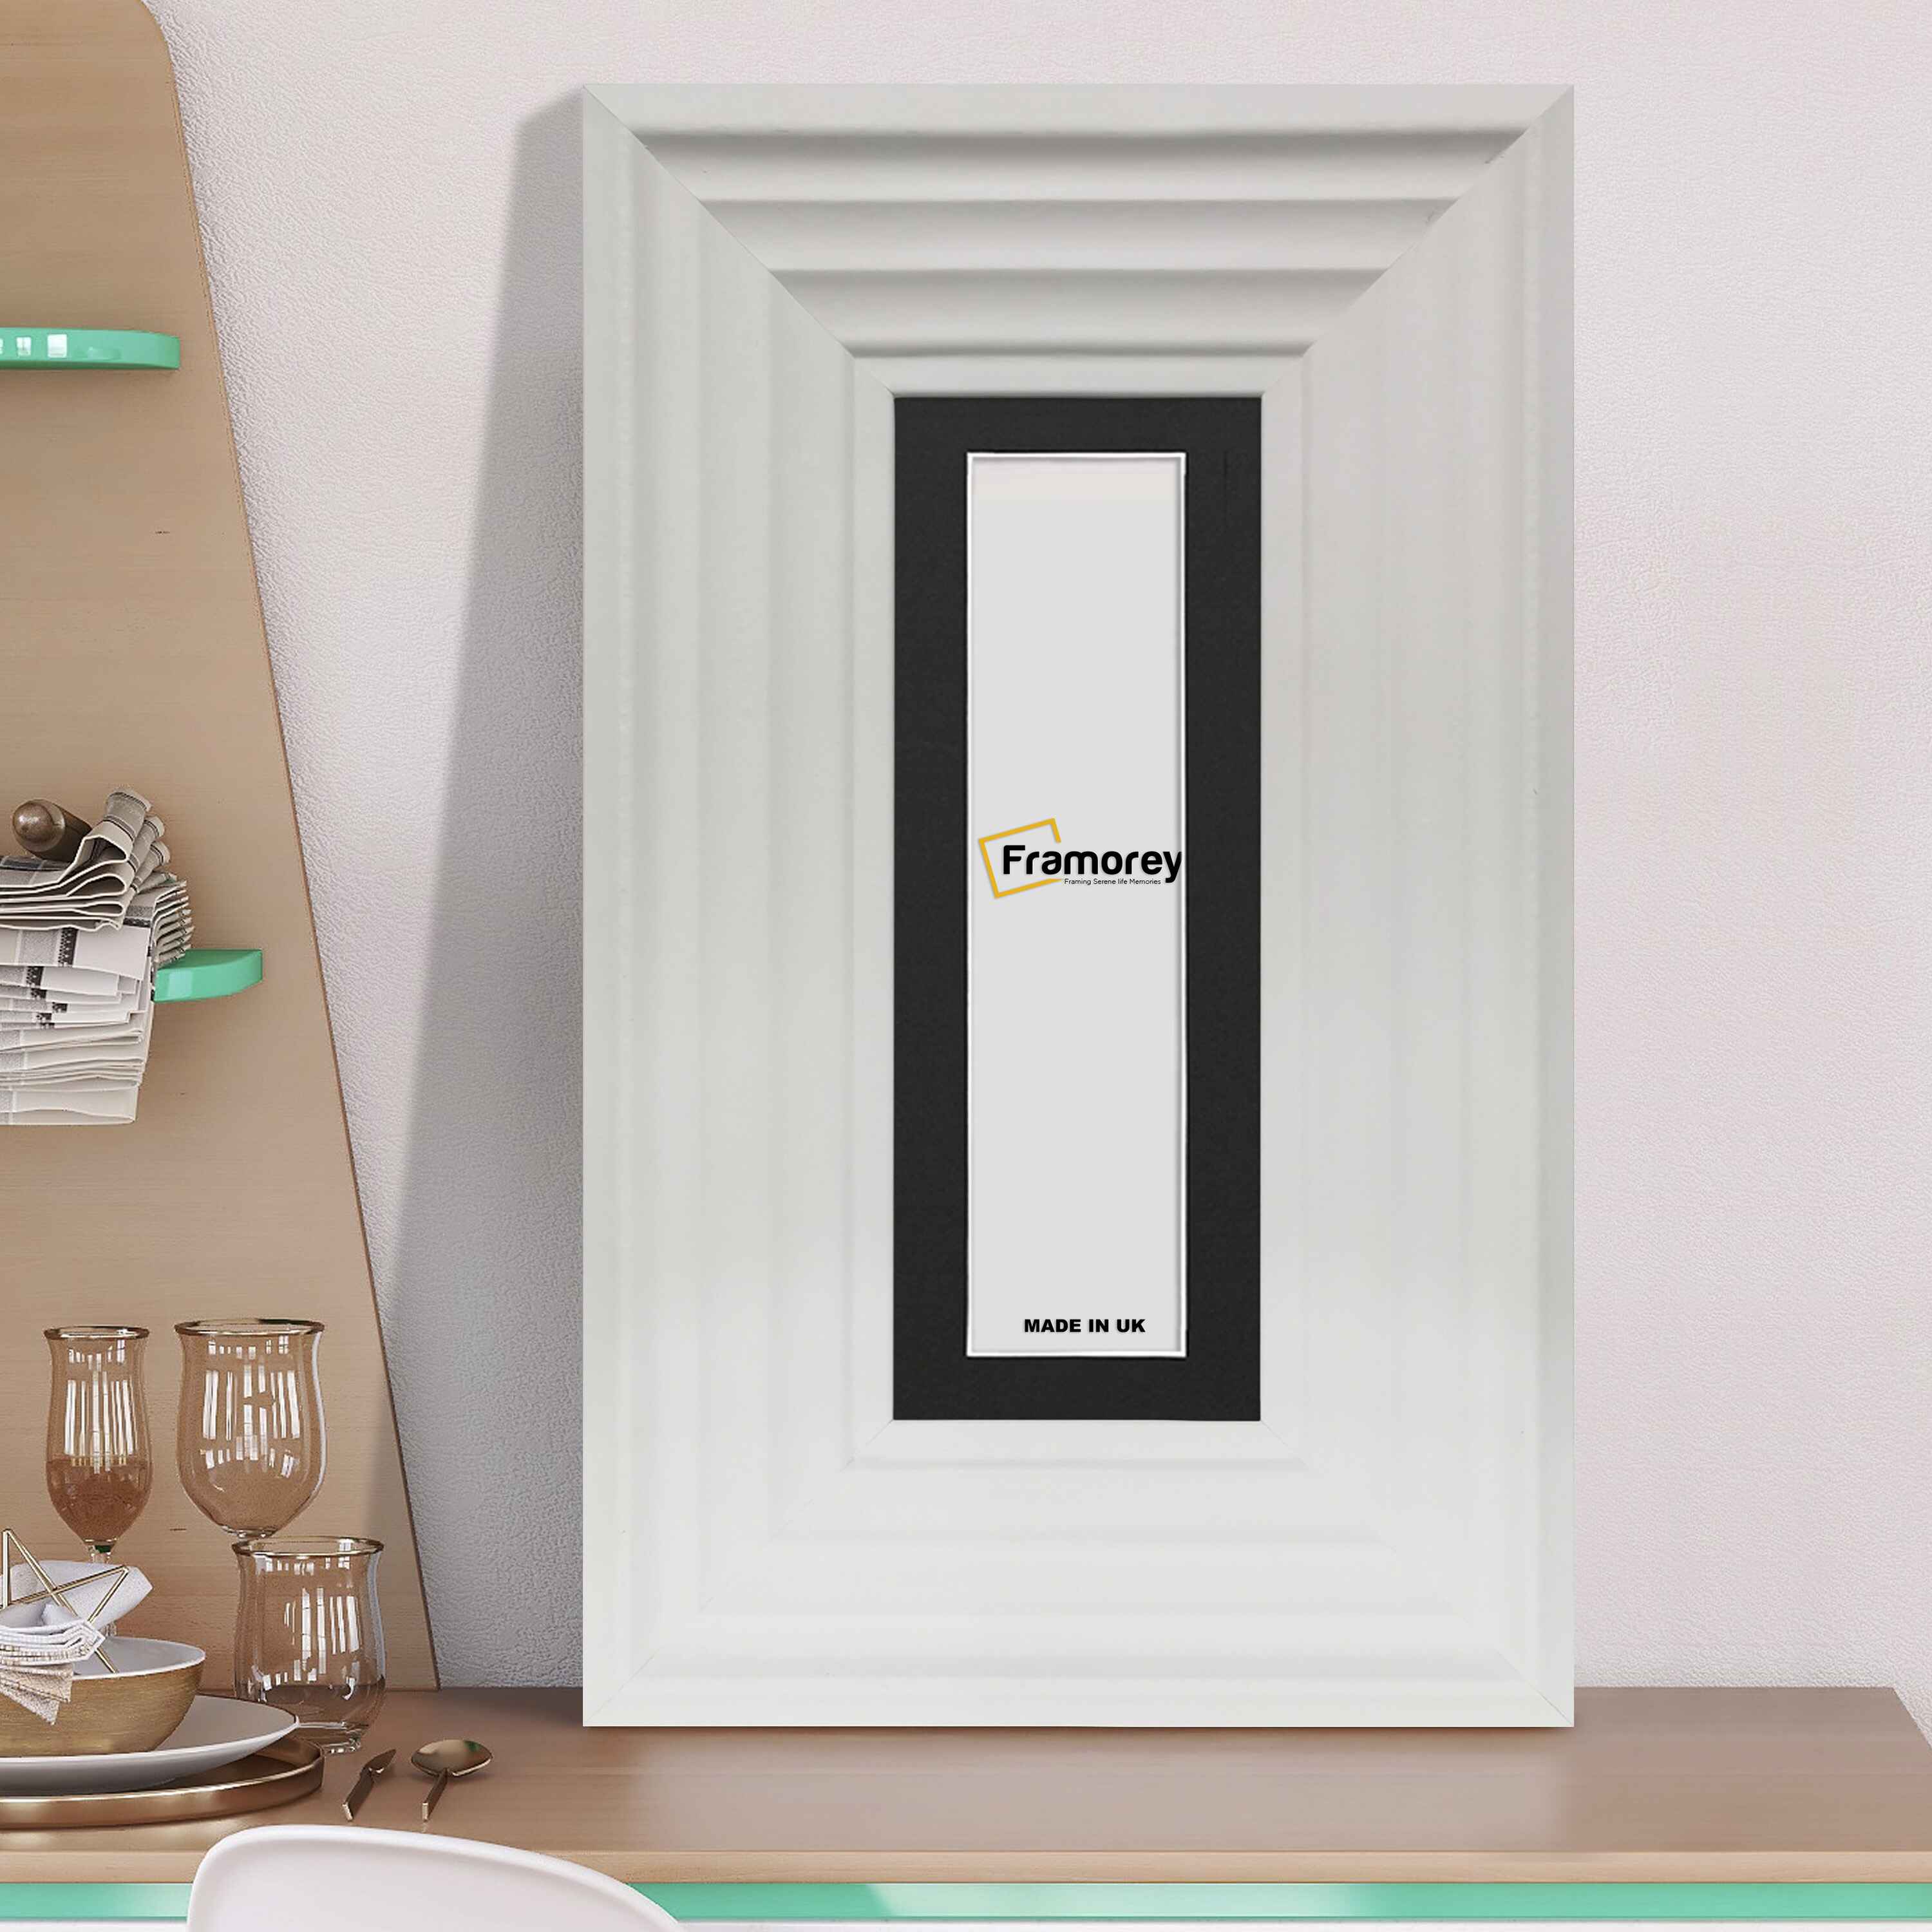 Panoramic Size White Wooden Picture Frame Big Step Style, With Black Mount